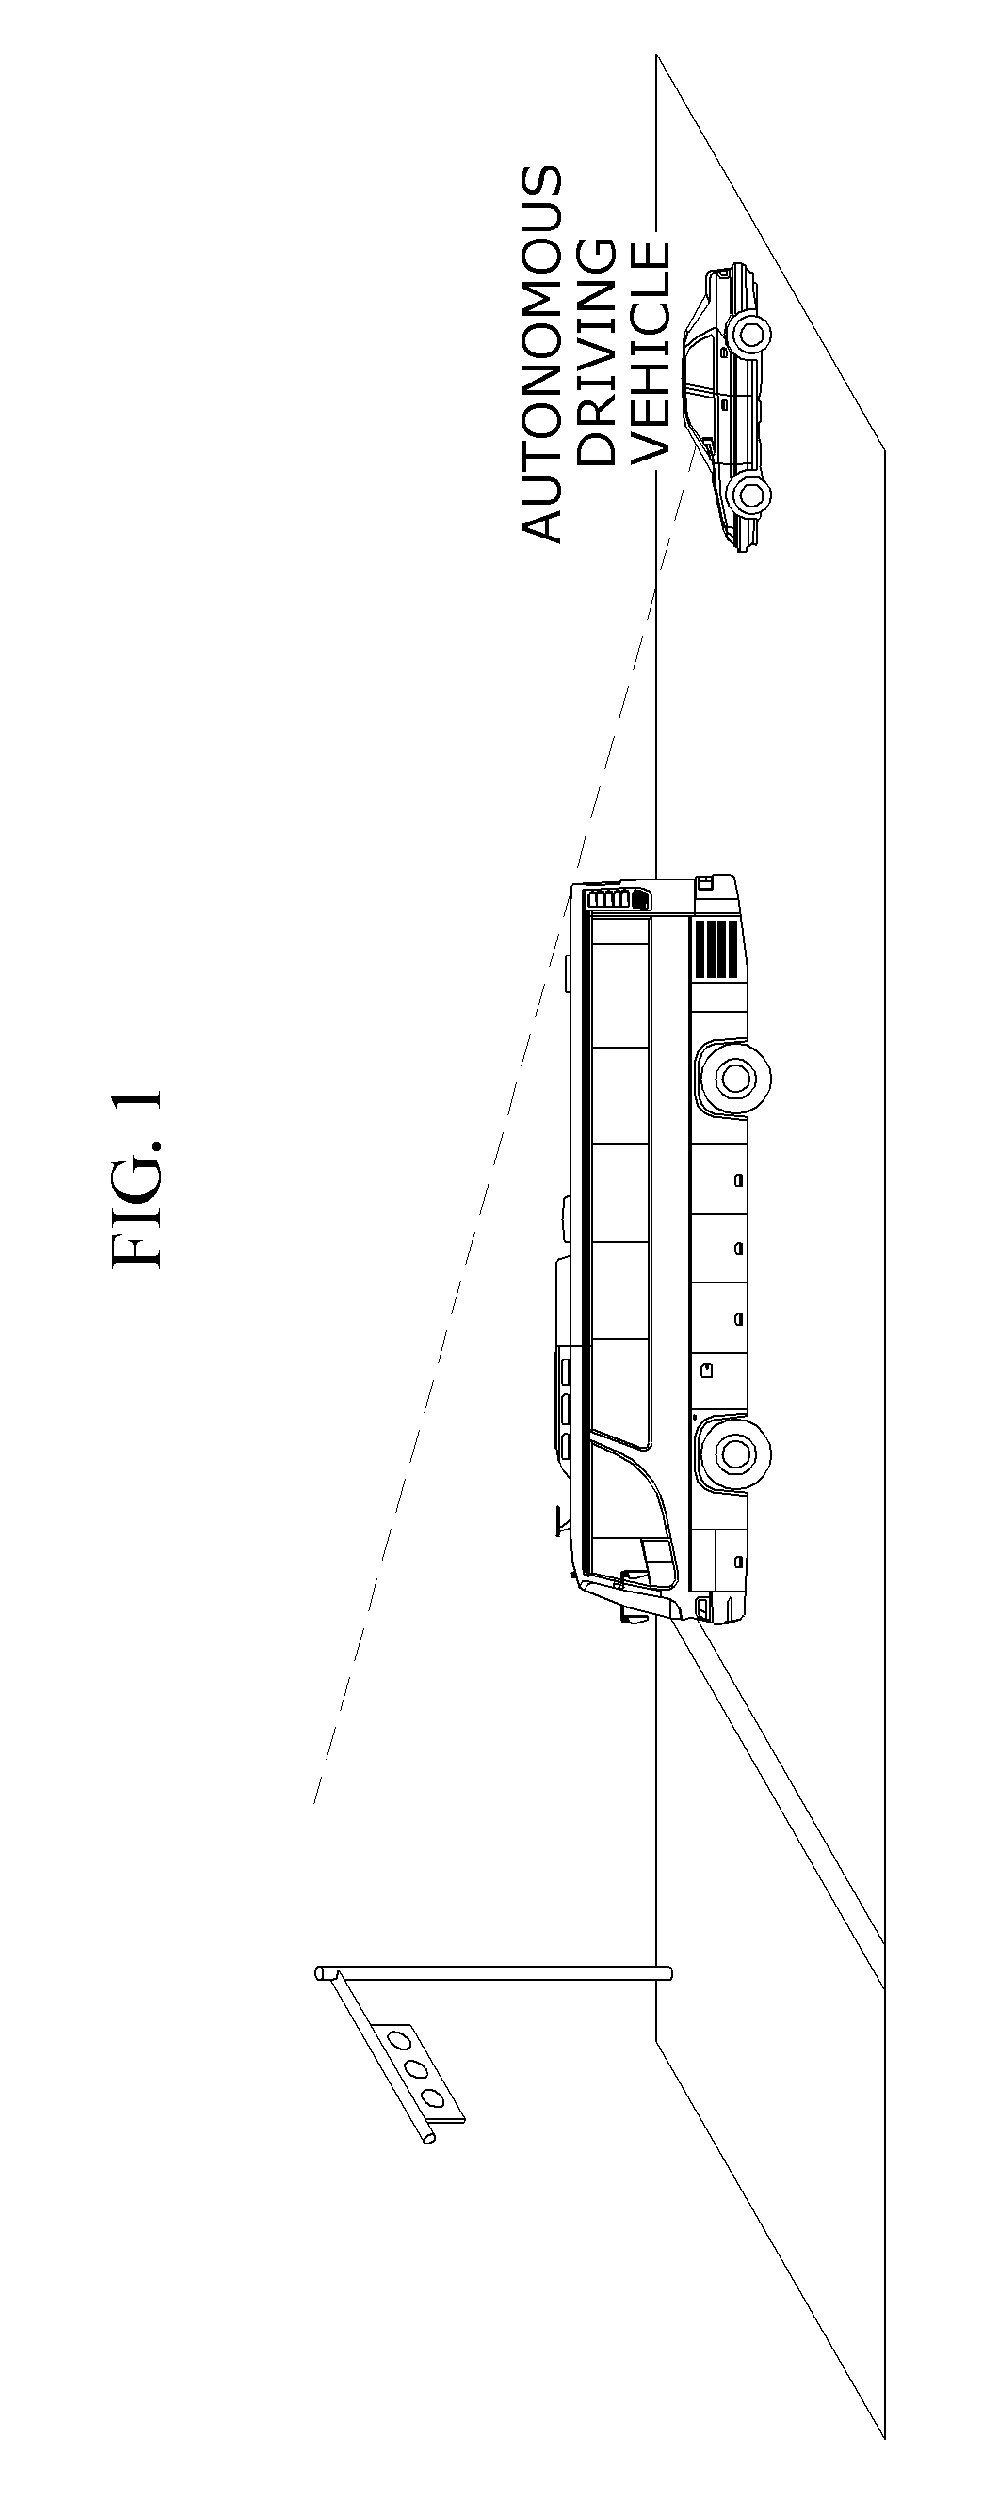 Autonomous vehicle driving system and method